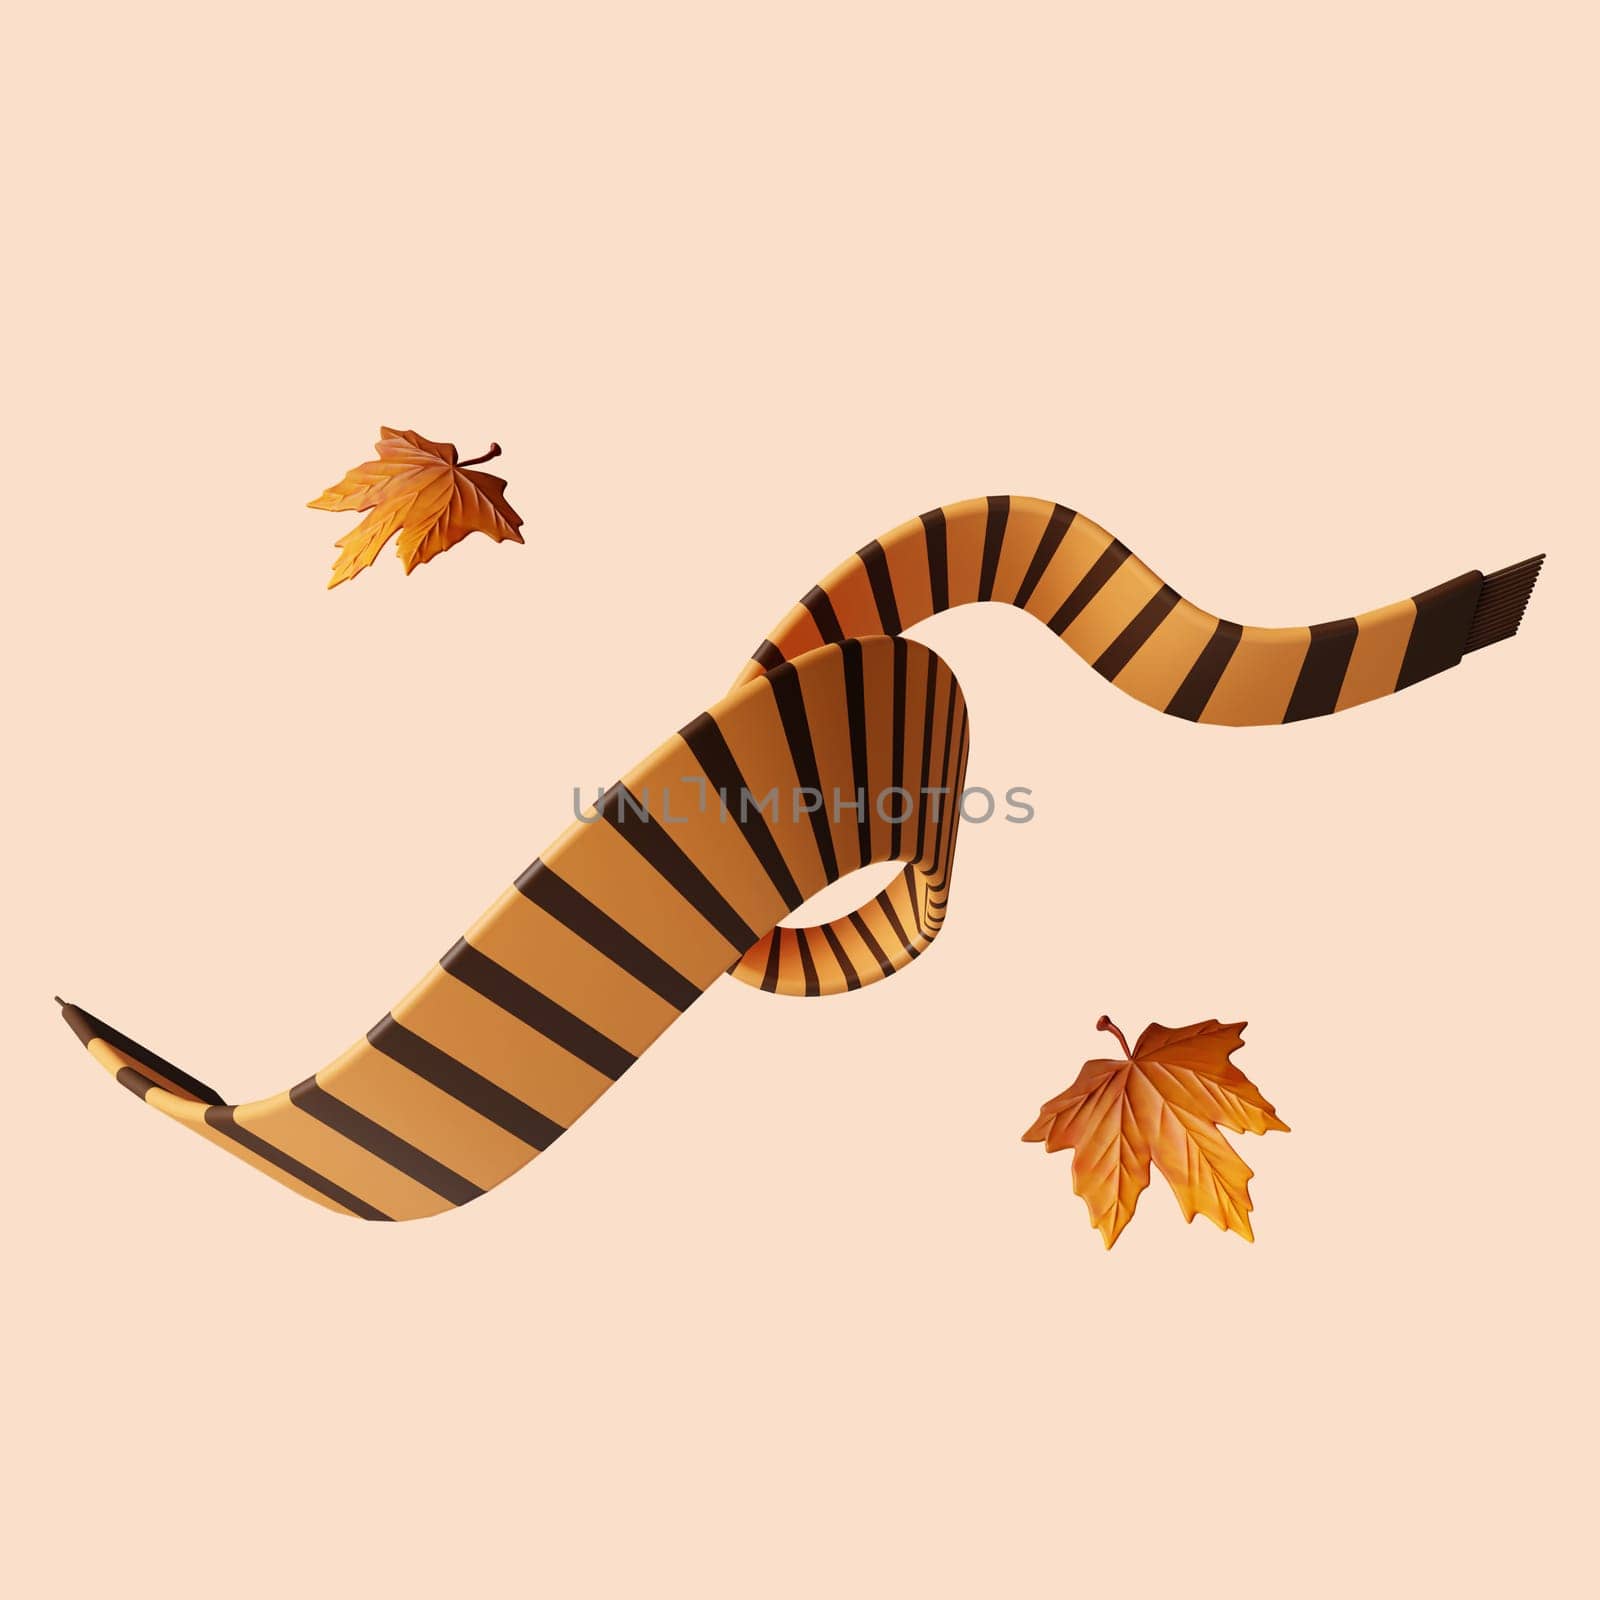 3d Autumn scarf. Golden fall. Season decoration. icon isolated on gray background. 3d rendering illustration. Clipping path. by meepiangraphic